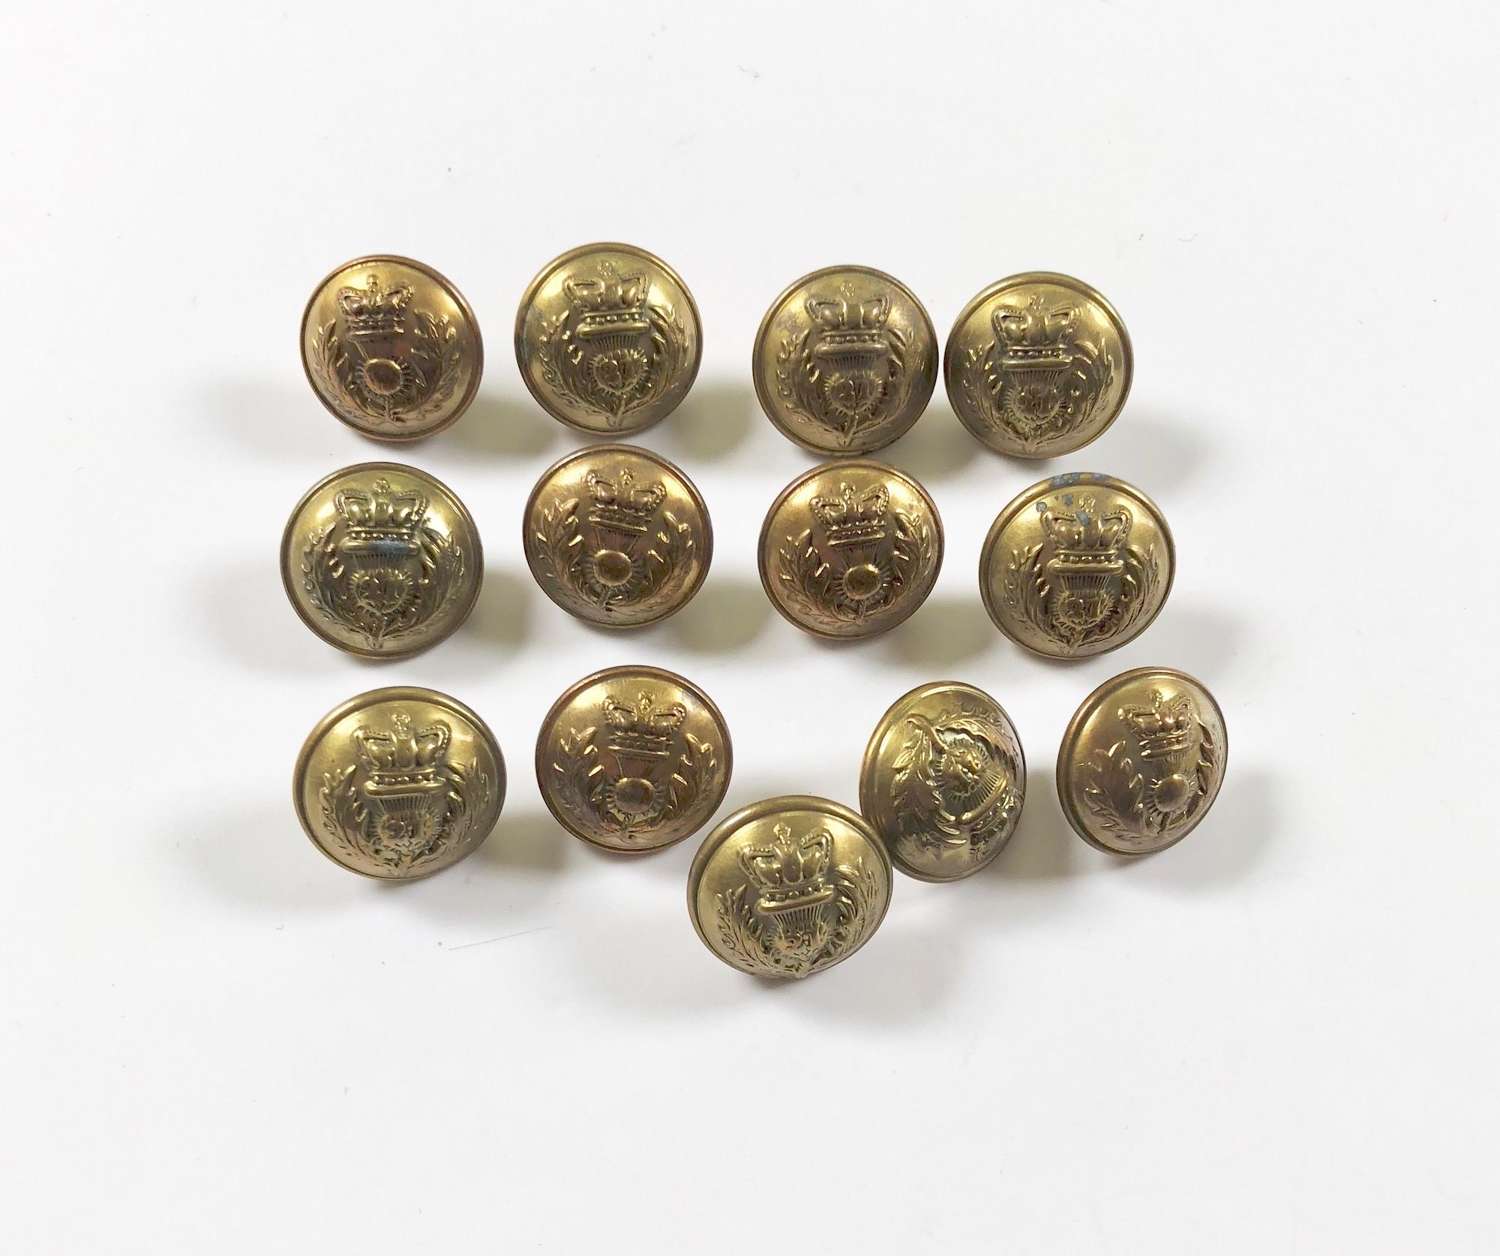 Royal Scots Fusiliers Victorian Small Dublet / Tunic Buttons.